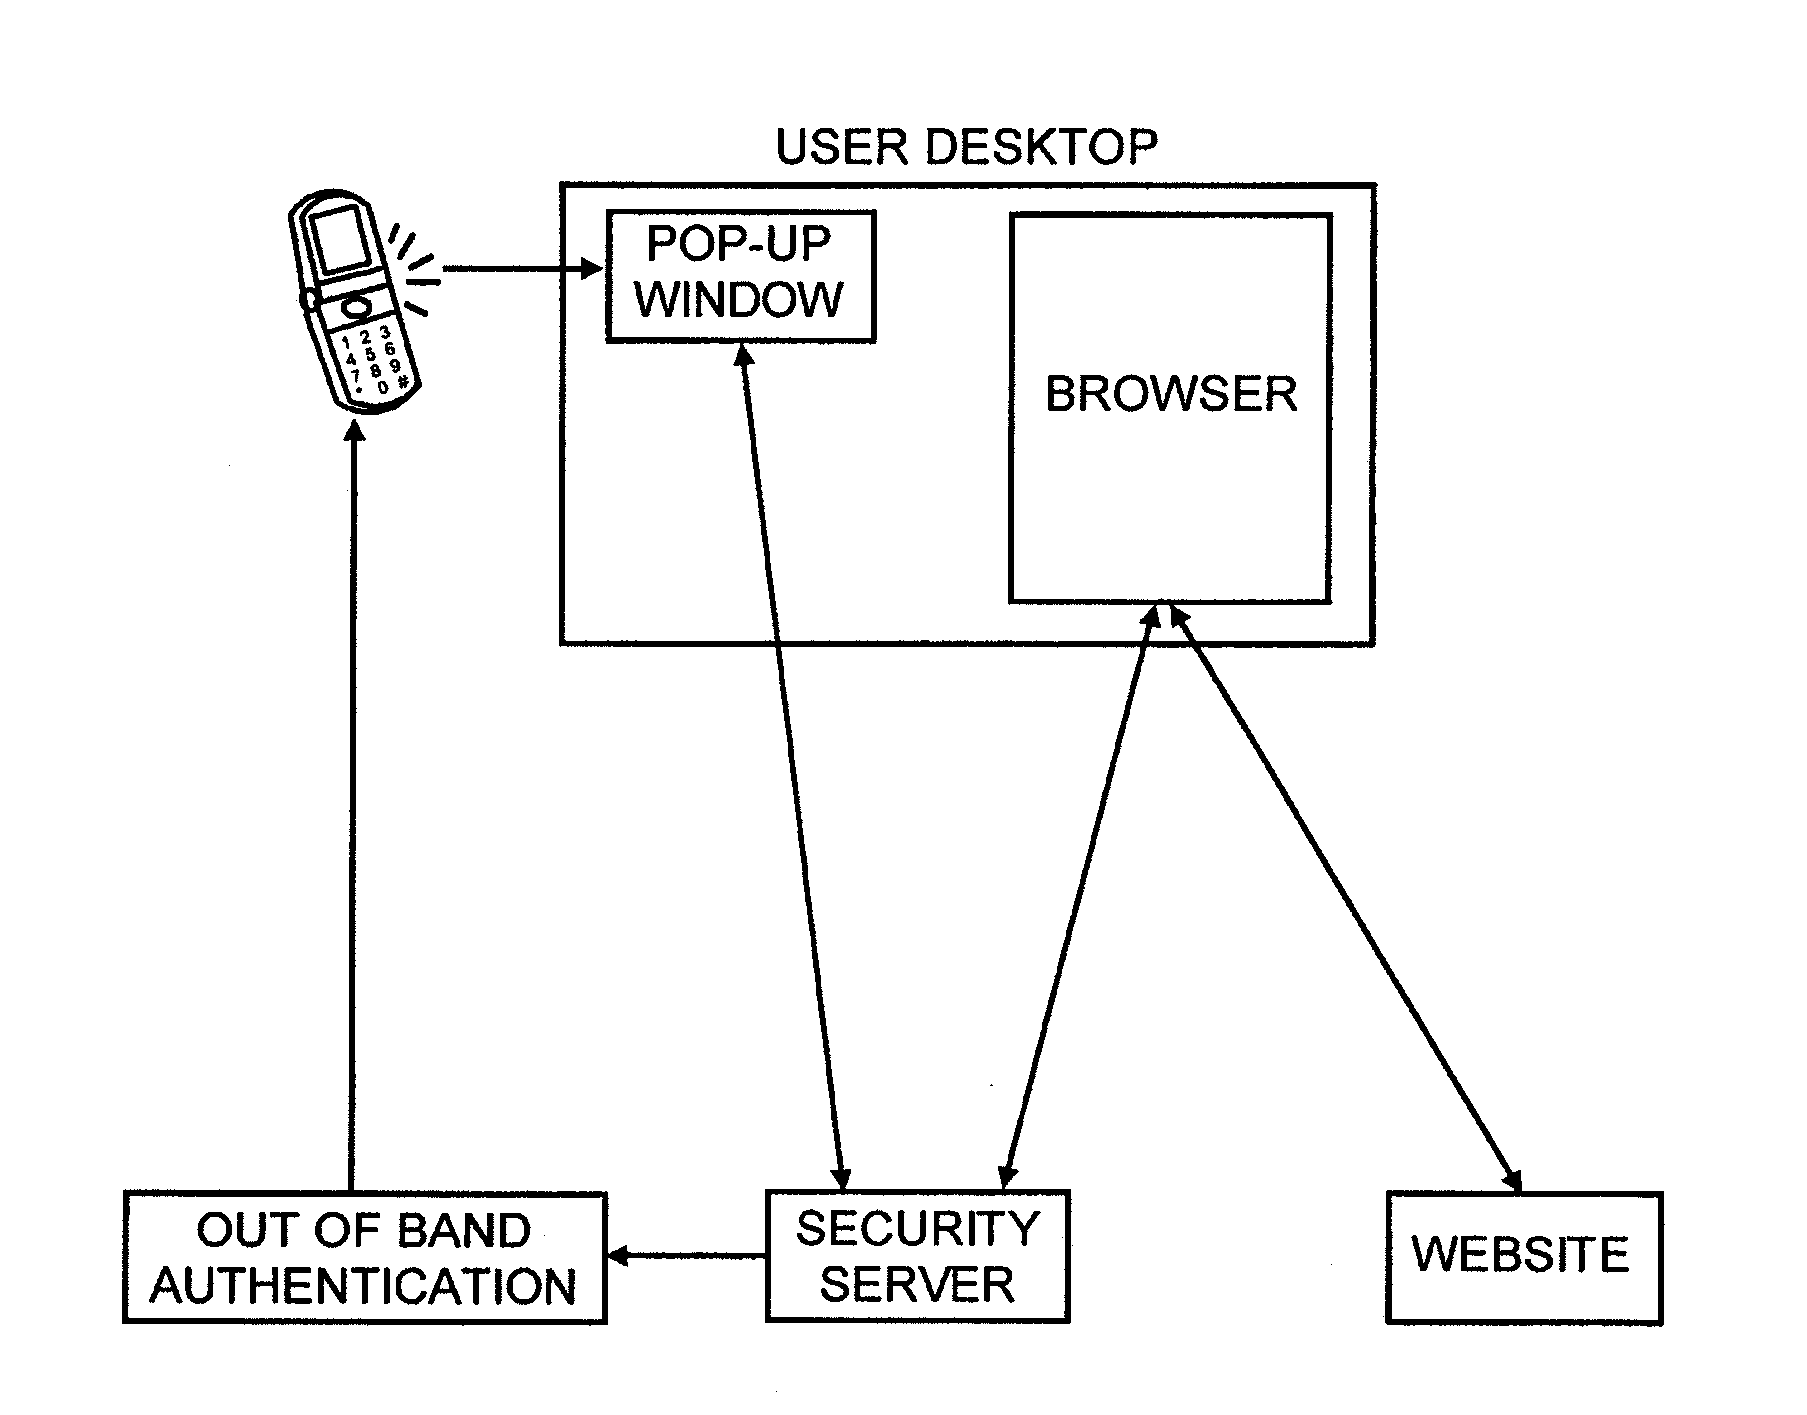 Secure and efficient login and transaction authentication using iphonestm and other smart mobile communication devices